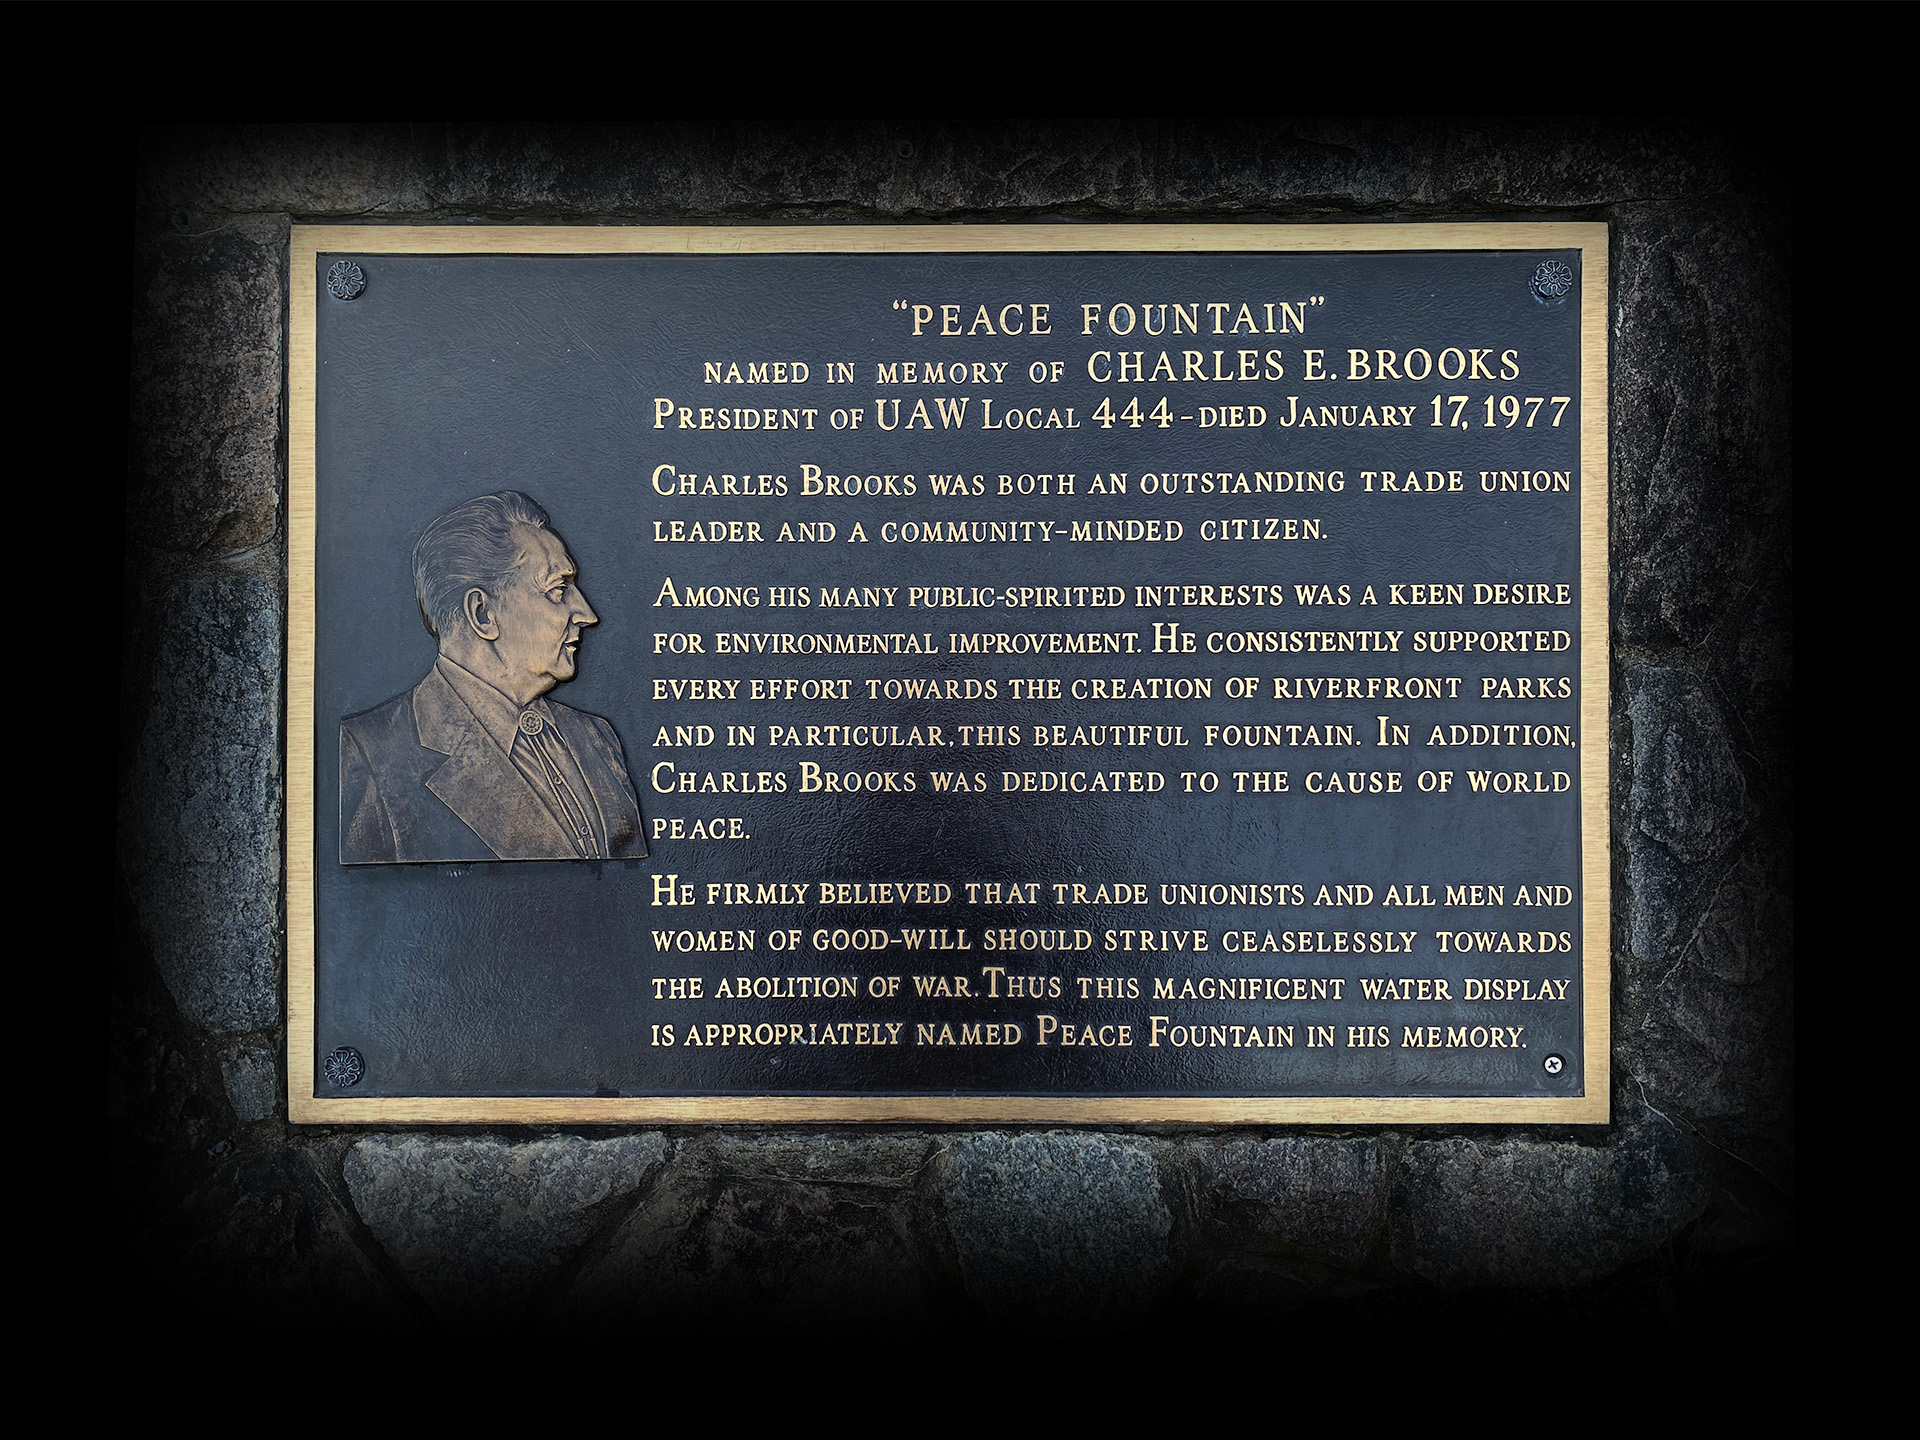 Memorial Plaque for Charles Brooks  at the Peace Fountain.